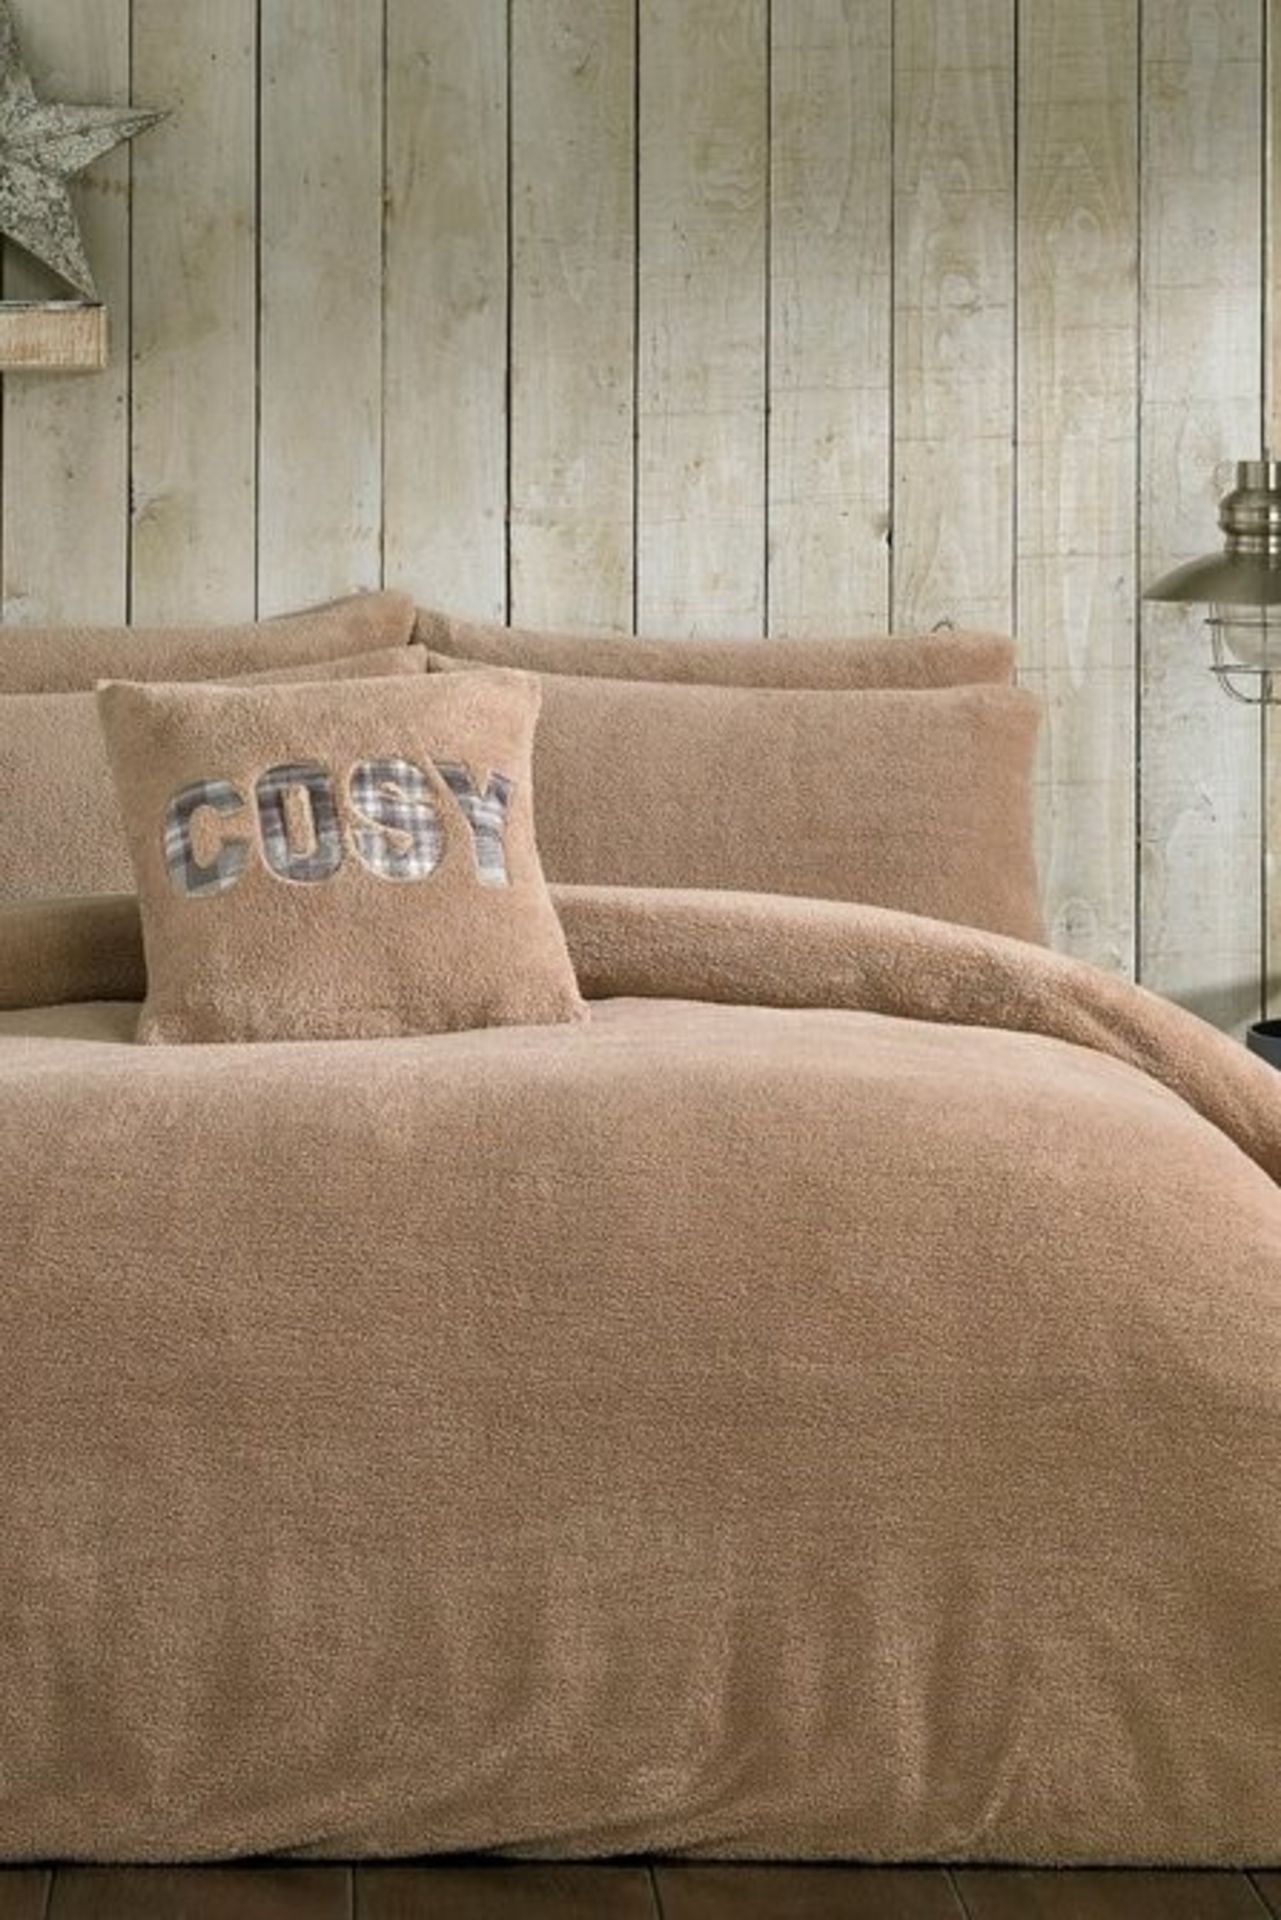 1 AS NEW BAGGED TEDDY FLEECE DUVET COVER SET IN MINK / KING SIZE (PUBLIC VIEWING AVAILABLE)